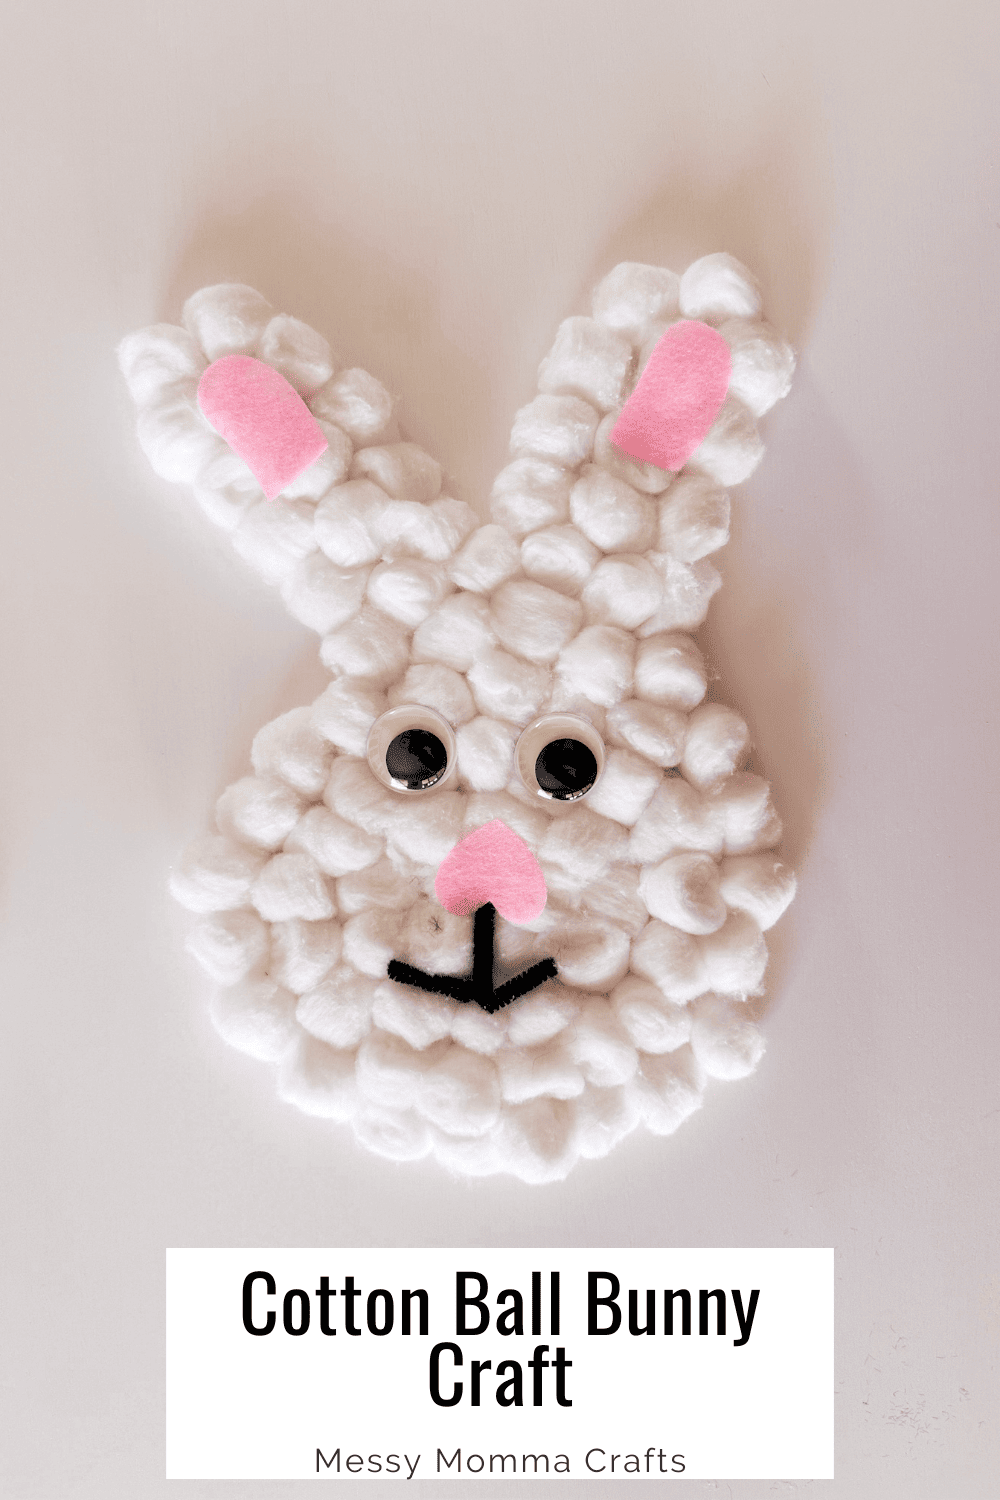 Cotton ball bunny with pink ears, googly eyes, and a black mouth.